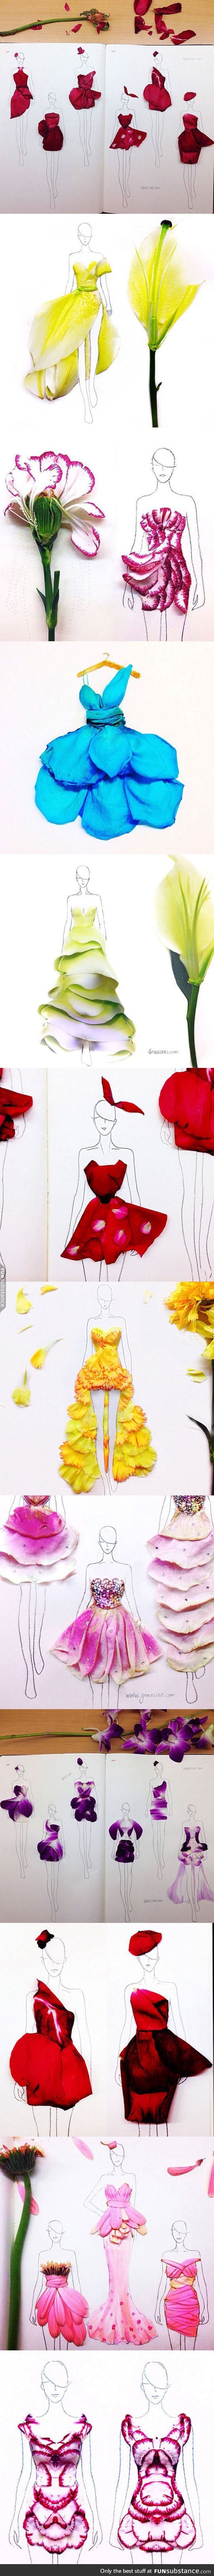 Real flower petals as clothing